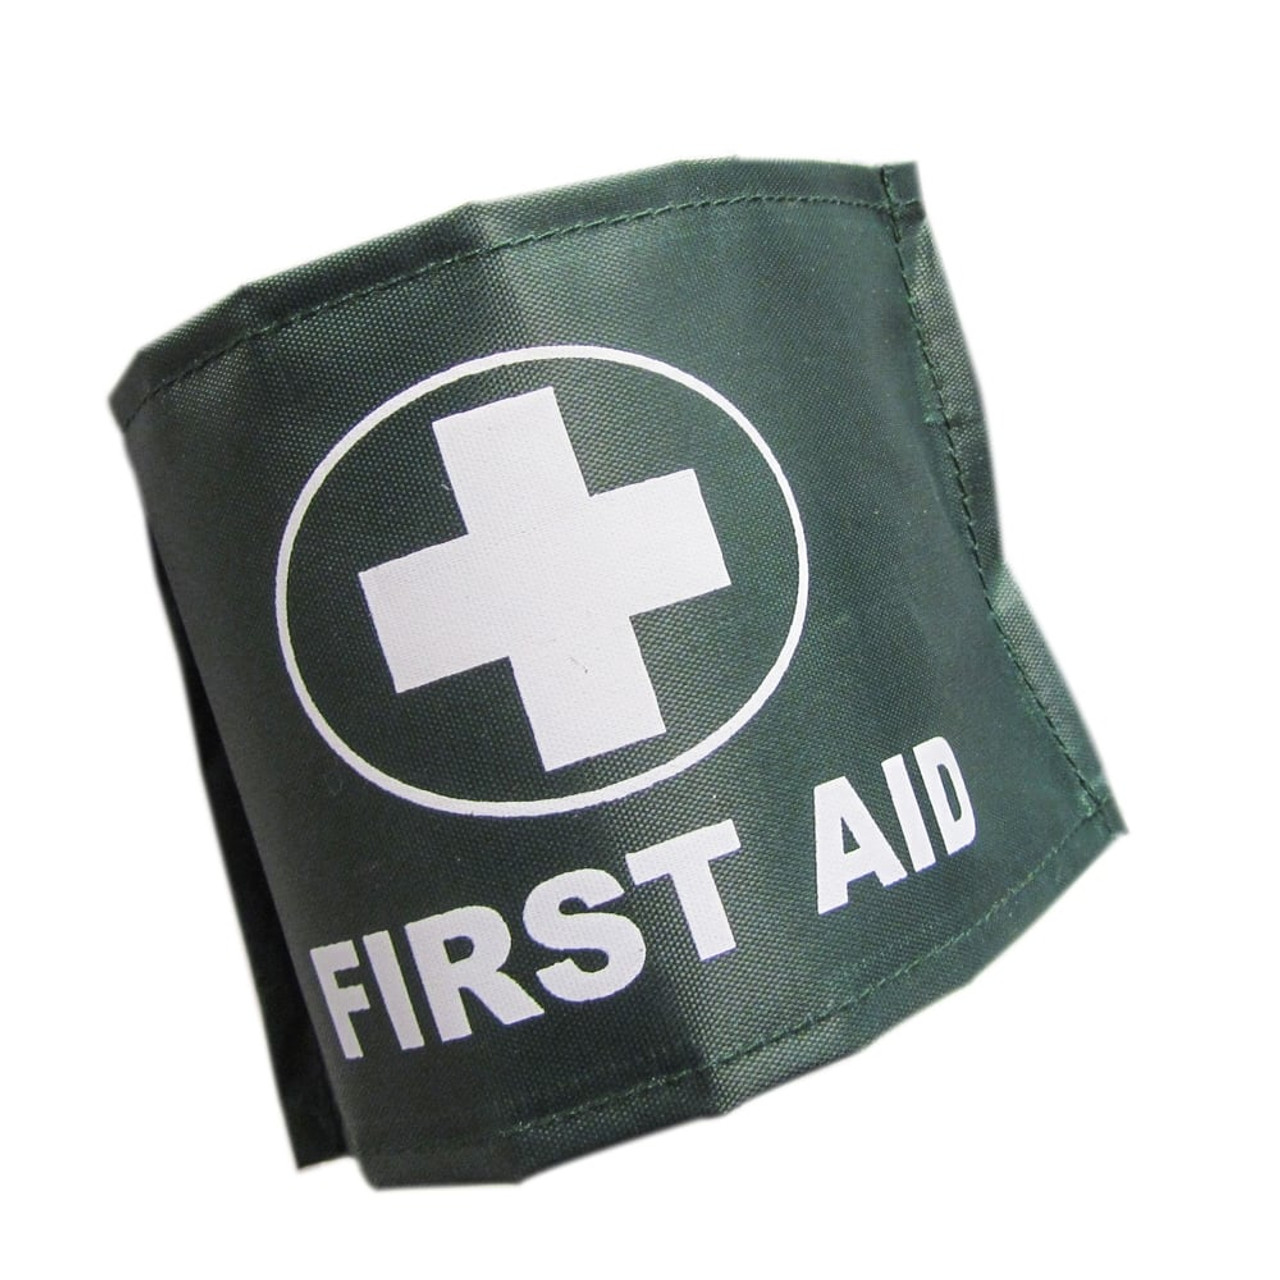 First Aid Arm Band First Aid Ds Medical